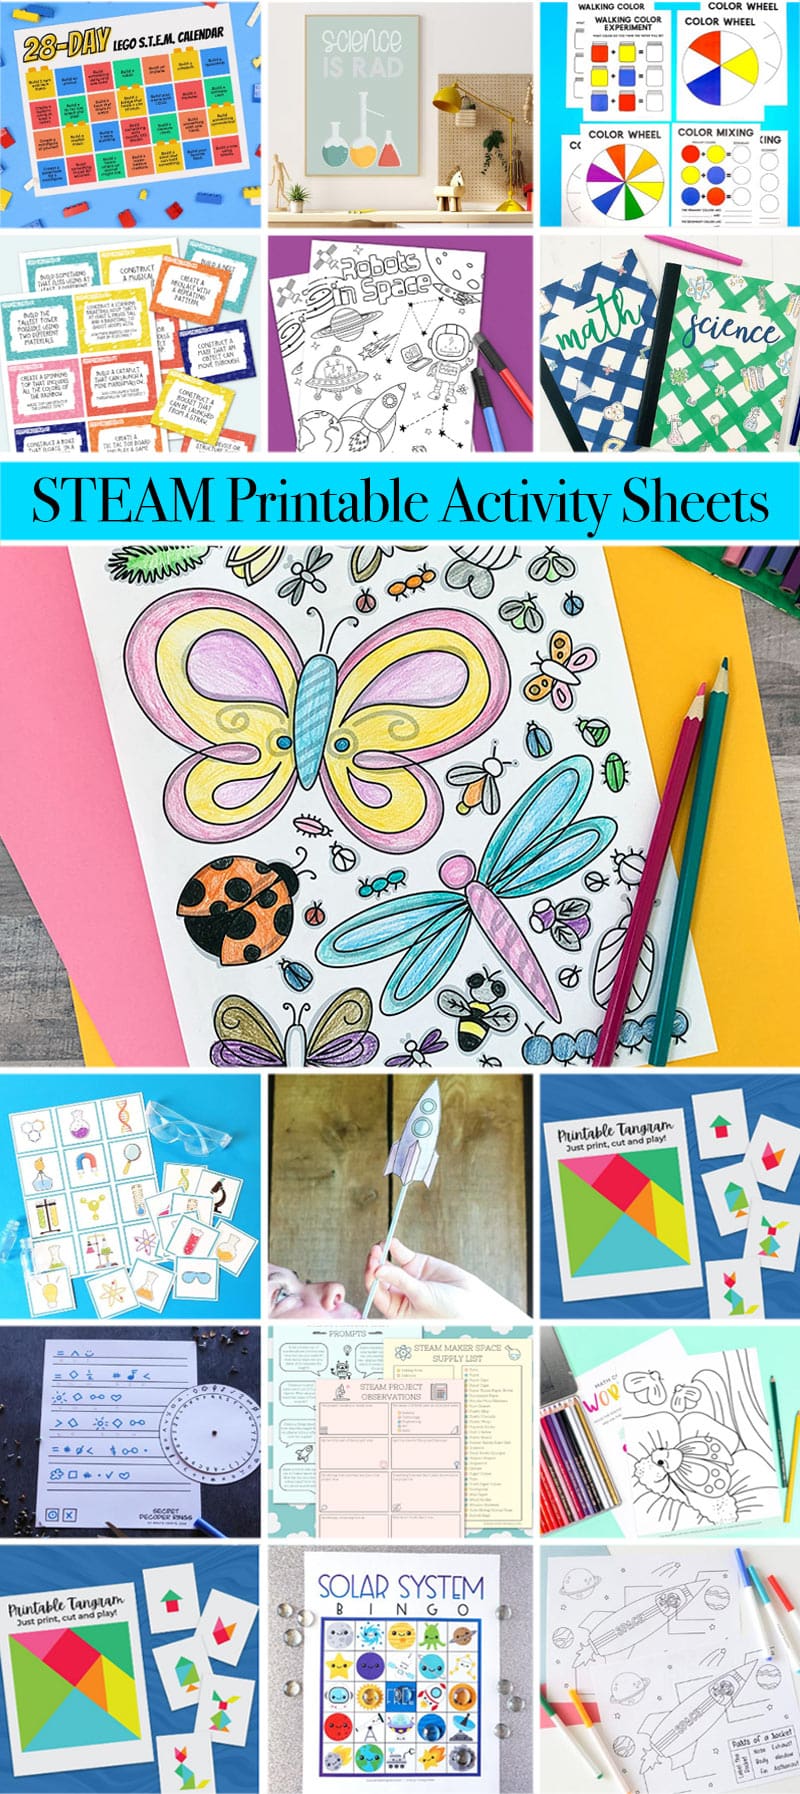 STEAM printable activity sheets your family can create and learn with